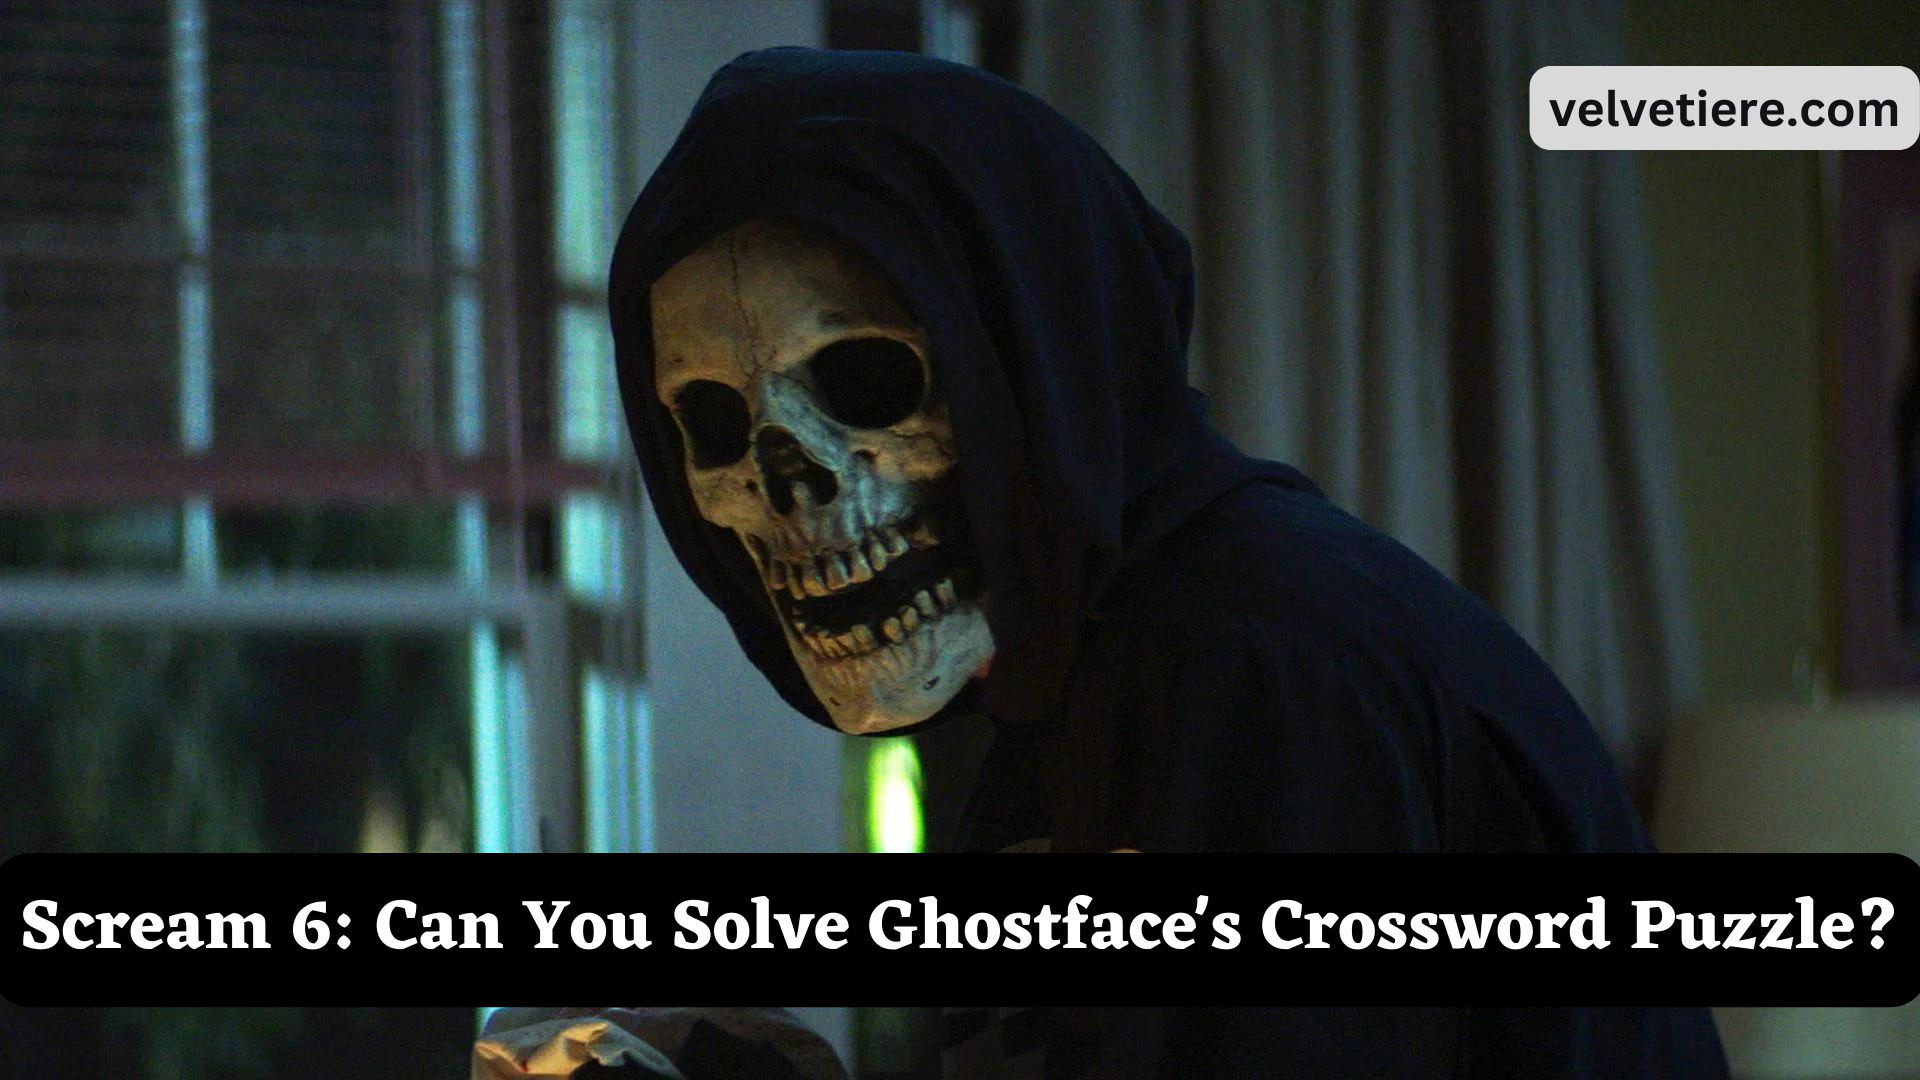 Scream 6: Can You Solve Ghostface's Crossword Puzzle?